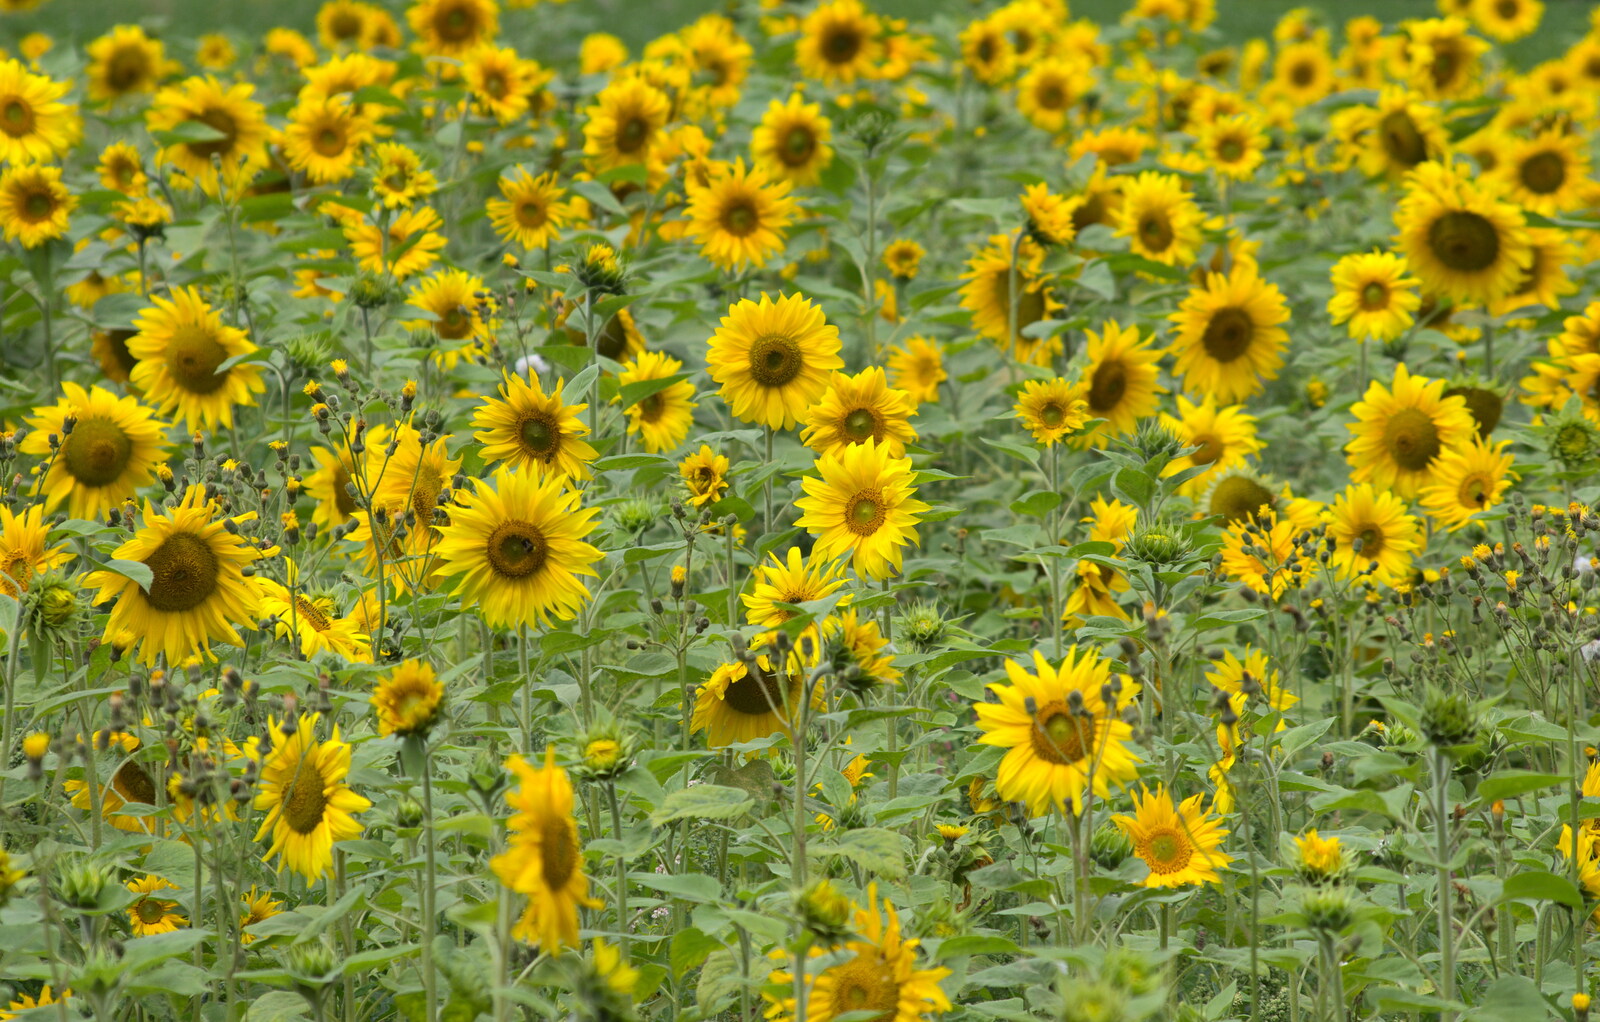 Uncle Mick's sunflowers at Valley Farm from A Race For Life, The Park, Diss, Norfolk - 16th August 2015